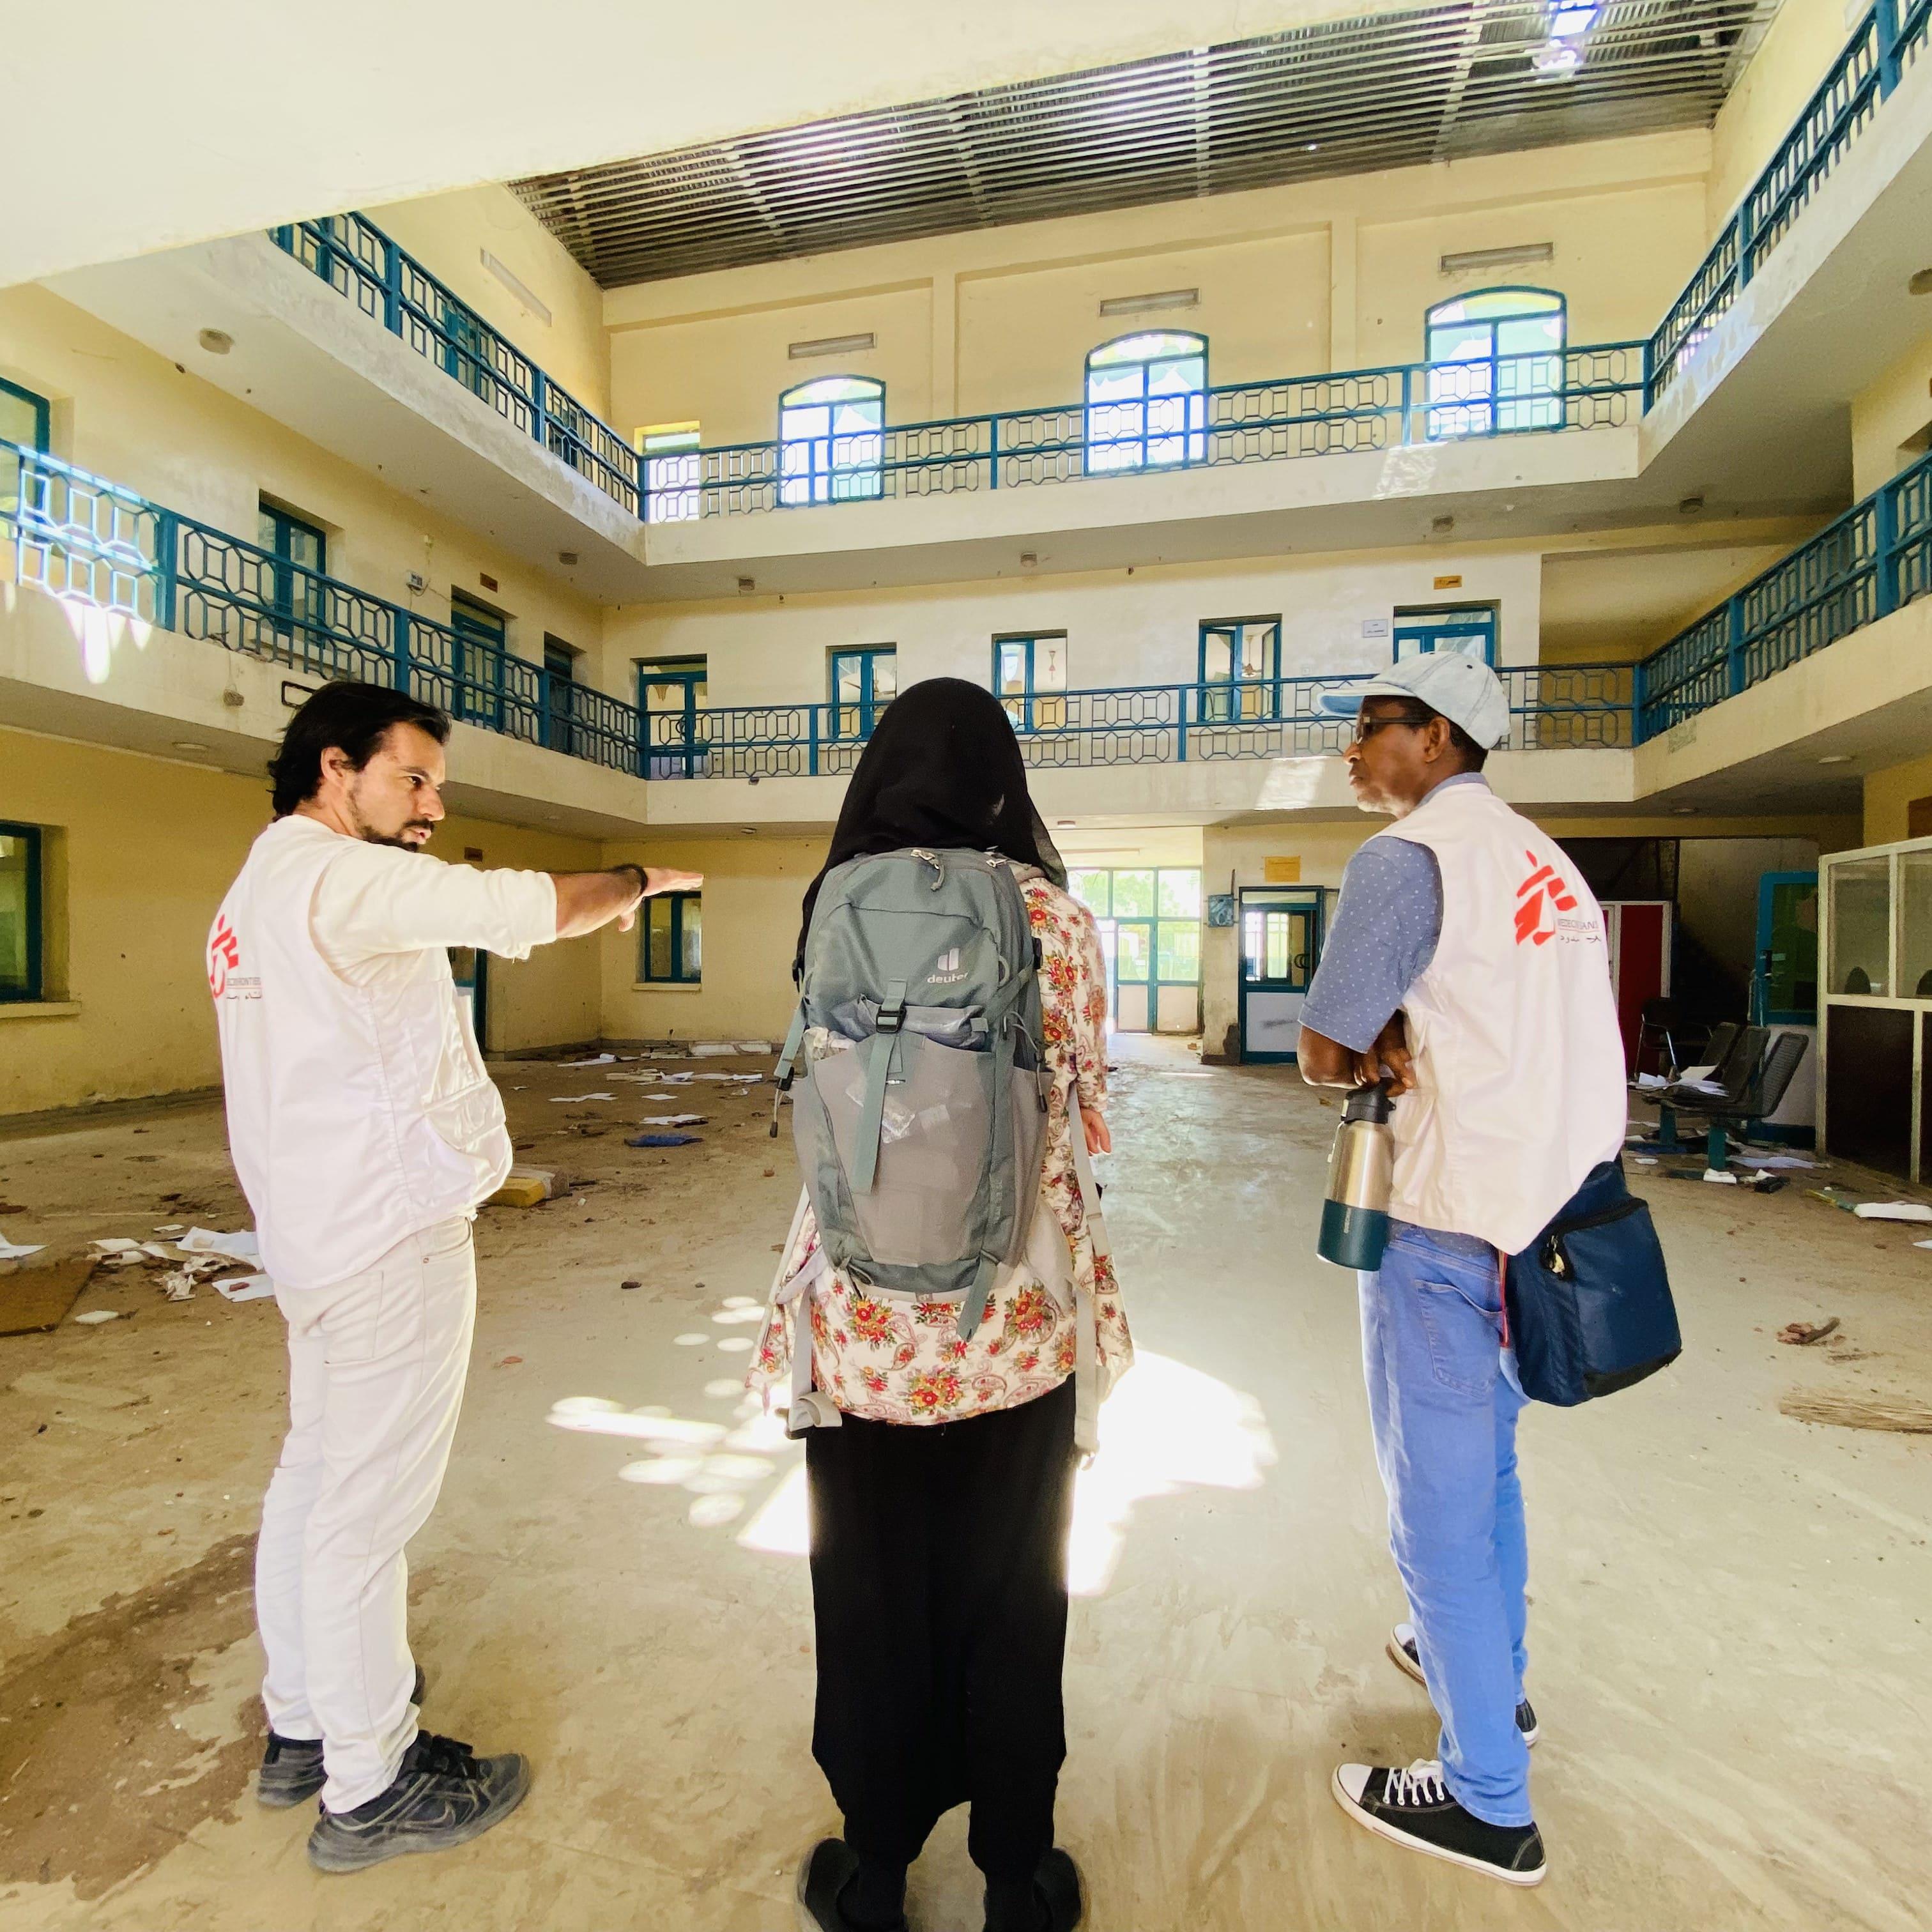 War in Sudan: MSF teams reassessing the damage at an MSF-supported health facility in Sudan, following a looting and storming incident.